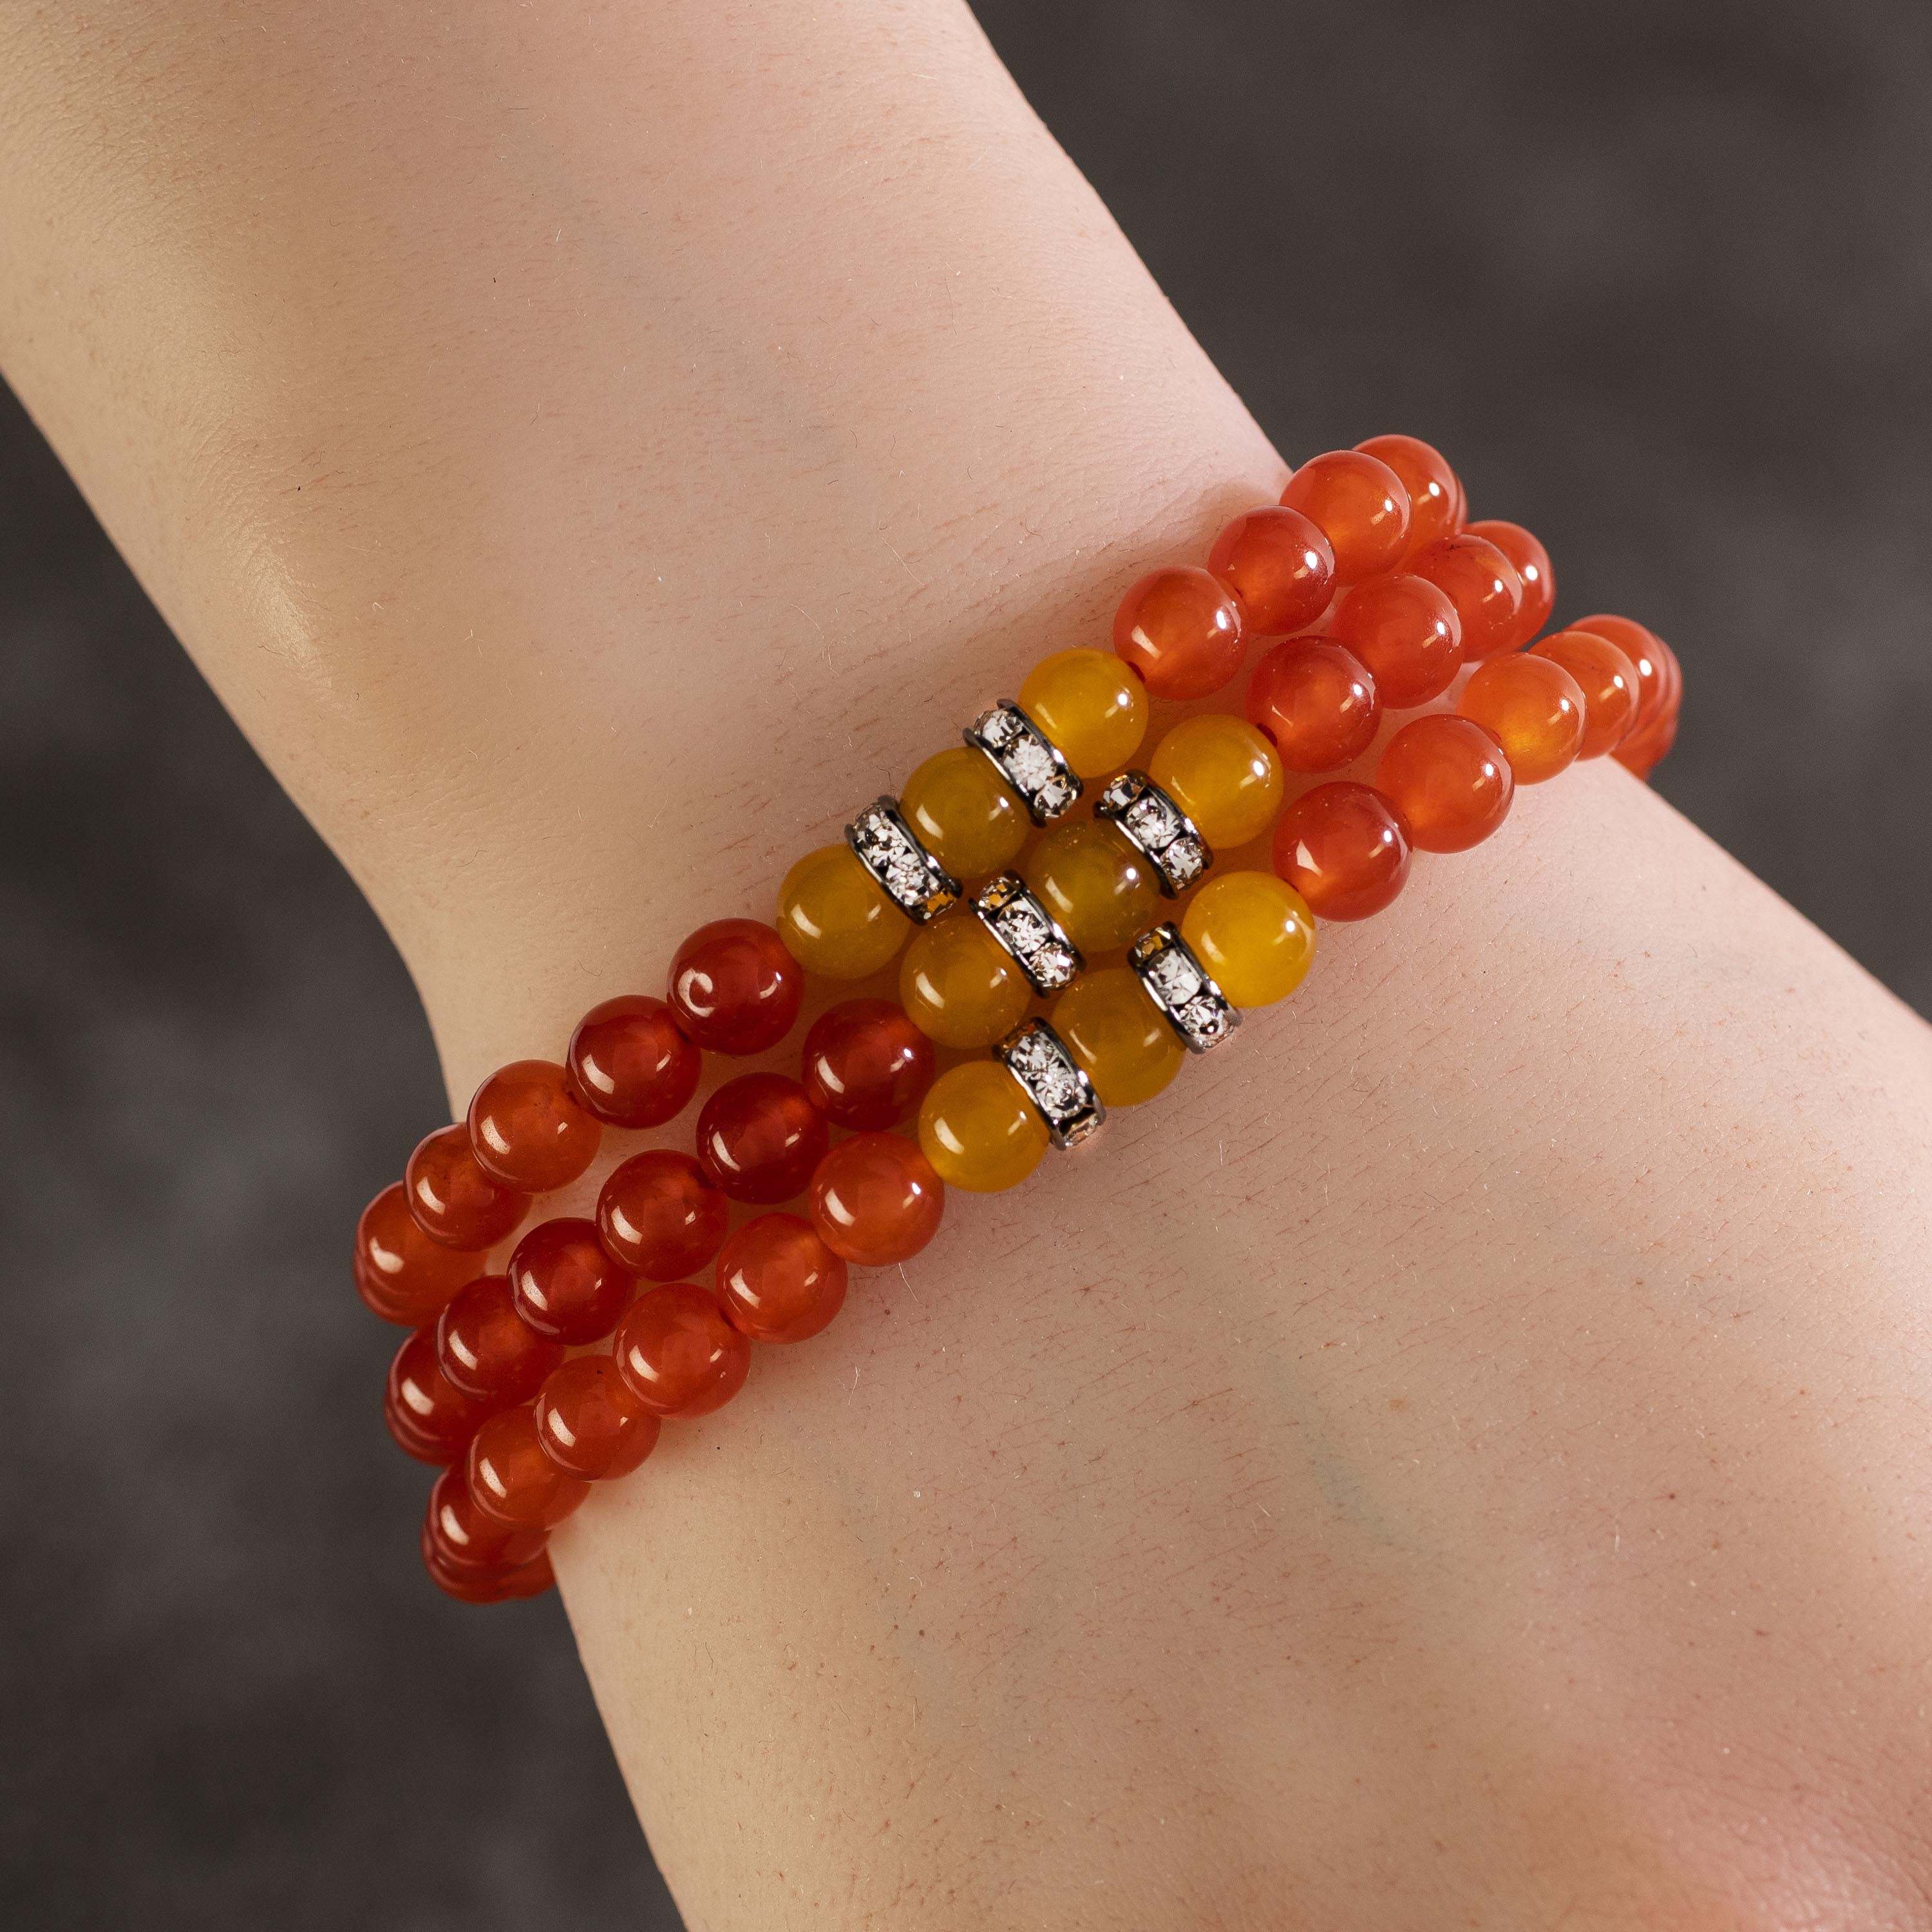 Kalifano Gemstone Bracelets Red Agate 6mm Beads with Yellow Agate and Silver Crystal Accent Beads Triple Wrap Elastic Gemstone Bracelet WHITE-BGI3-062